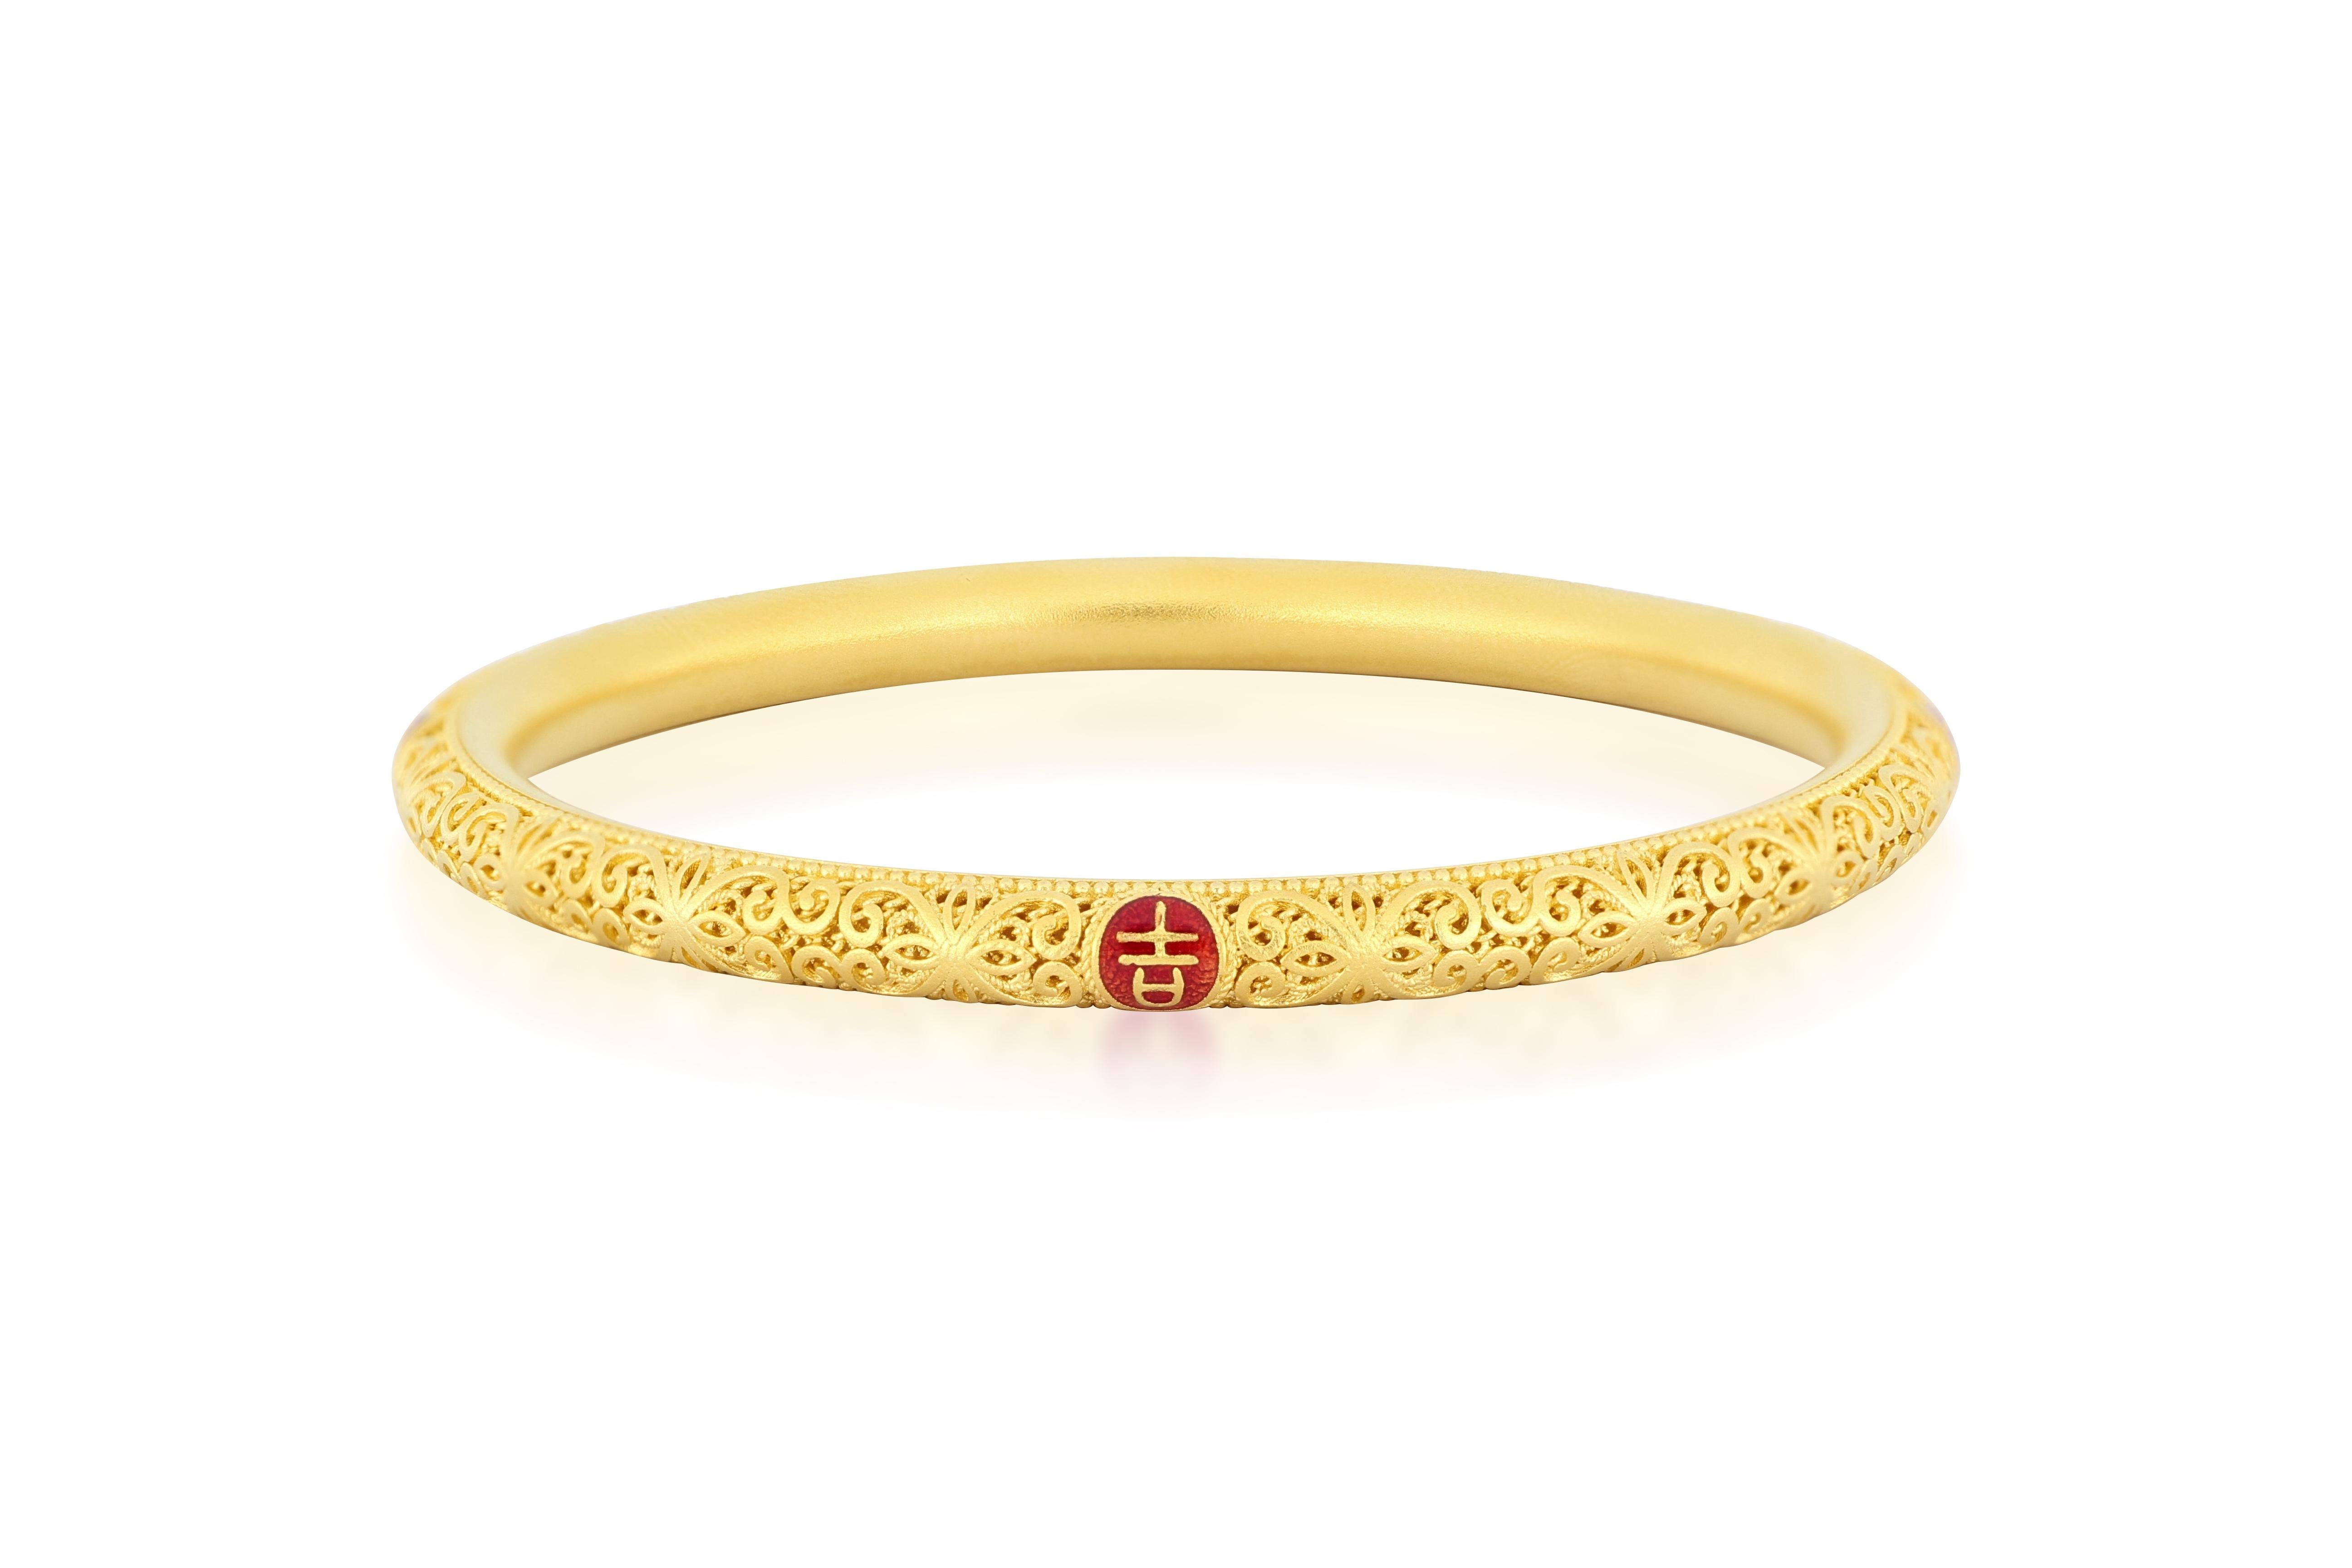 This is an exceptional piece of bangle, made of 99.9% pure gold weighing 30.18g, decorated with pattren of Chinese theme. The piece demonstrates superb craftsmanship of Chinese filigree inlay art.

Chinese filigree inlay art is a delicate kind of